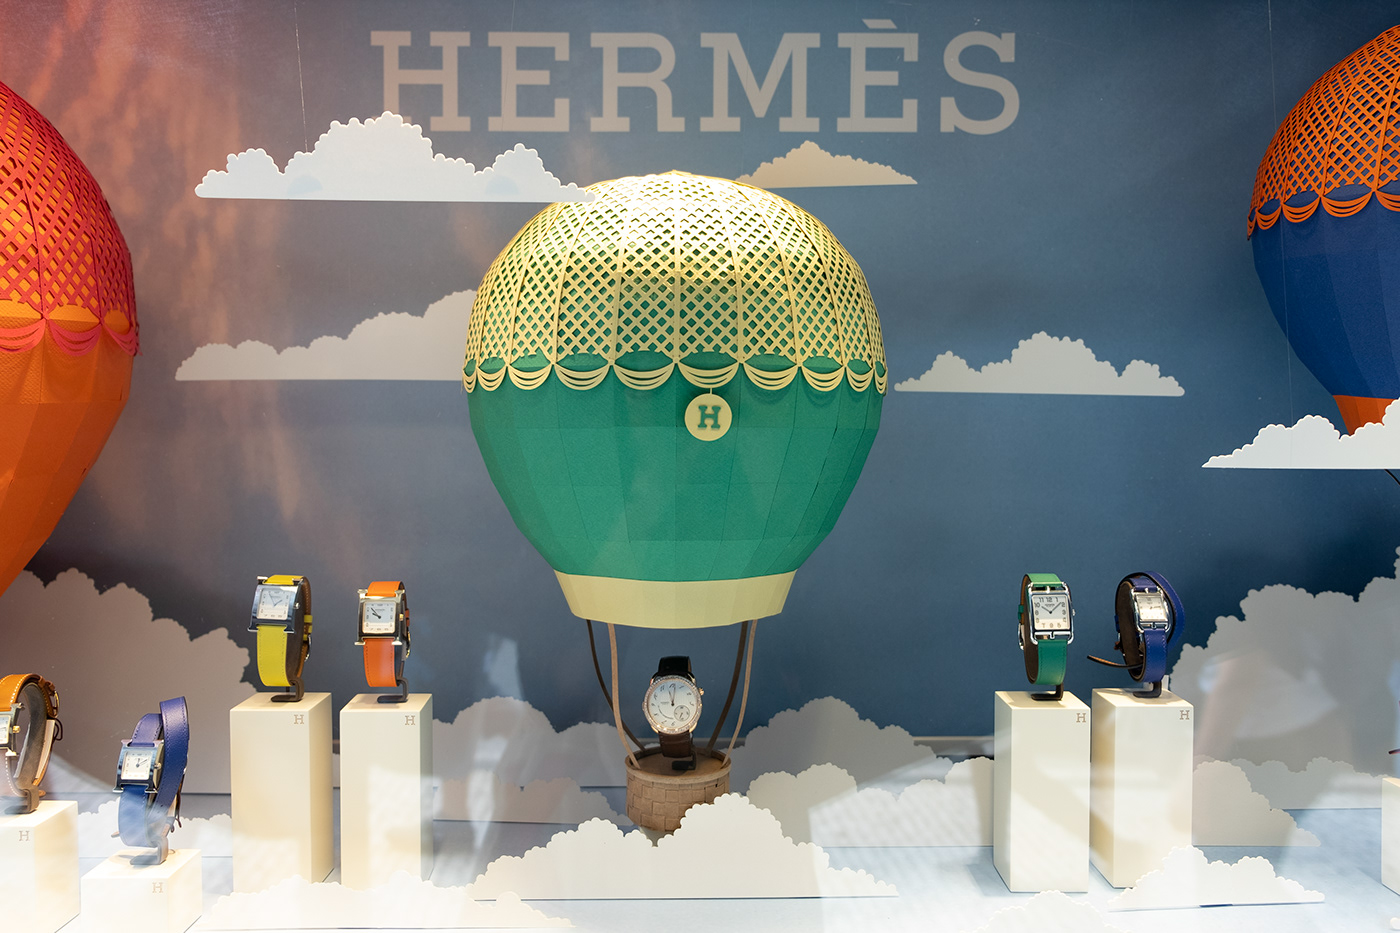 Window store Display Exhibition  hermes ballon hot air balloons clouds SKY papercraft